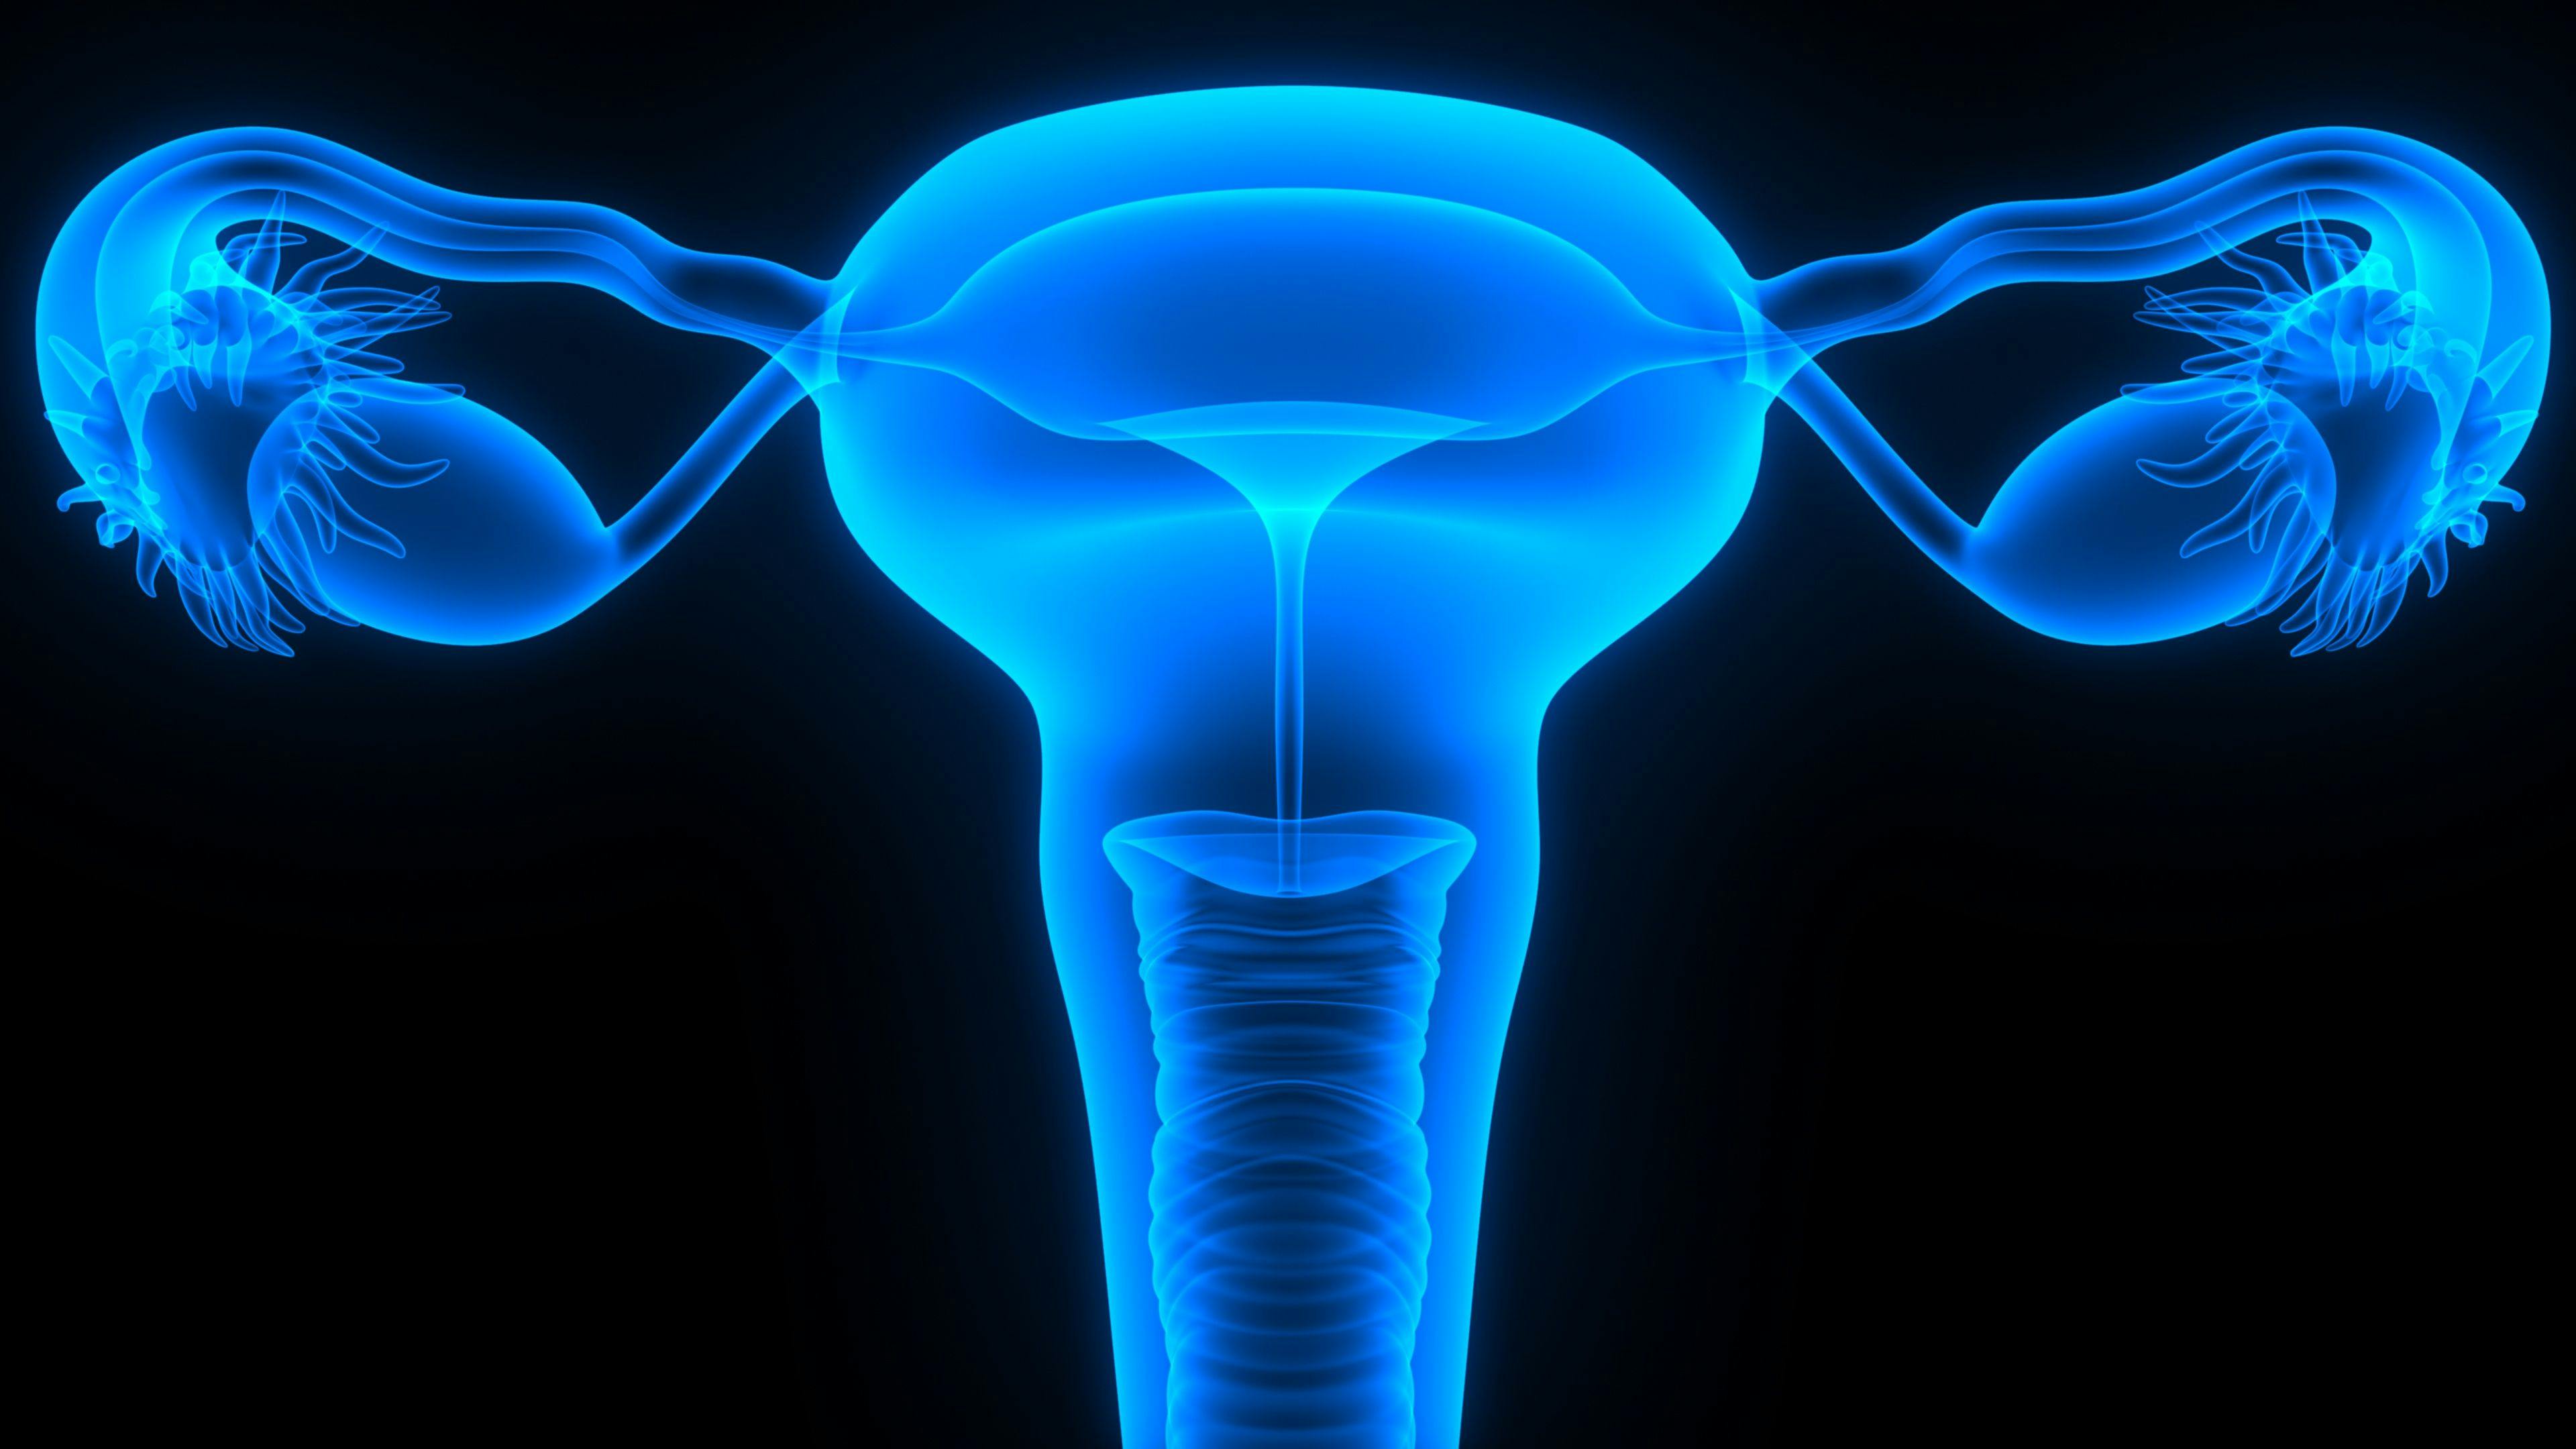 HIPEC Plus Surgery Improves Survival in Stage III Ovarian Cancer